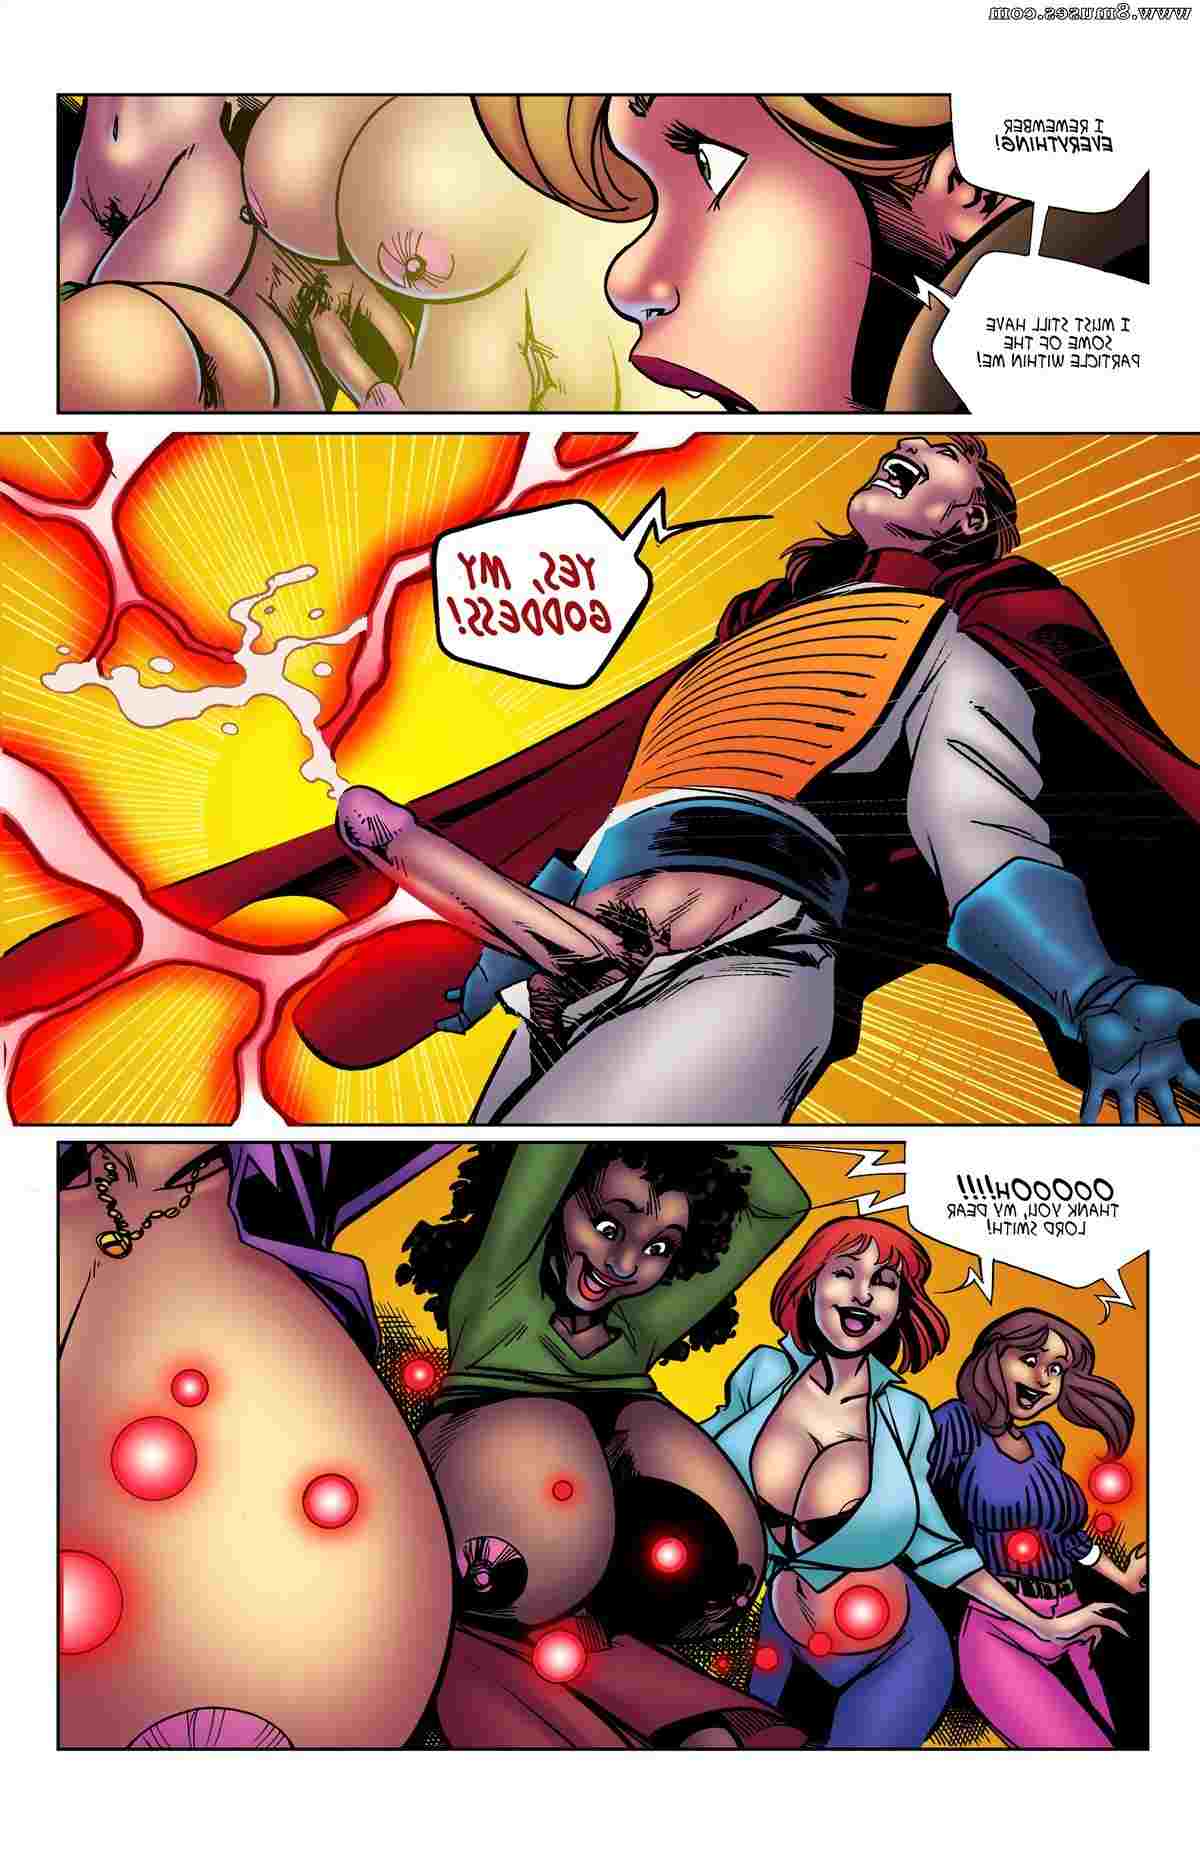 BE-Story-Club-Comics/Collider-The-BE-Particle Collider_-_The_BE_Particle__8muses_-_Sex_and_Porn_Comics_71.jpg